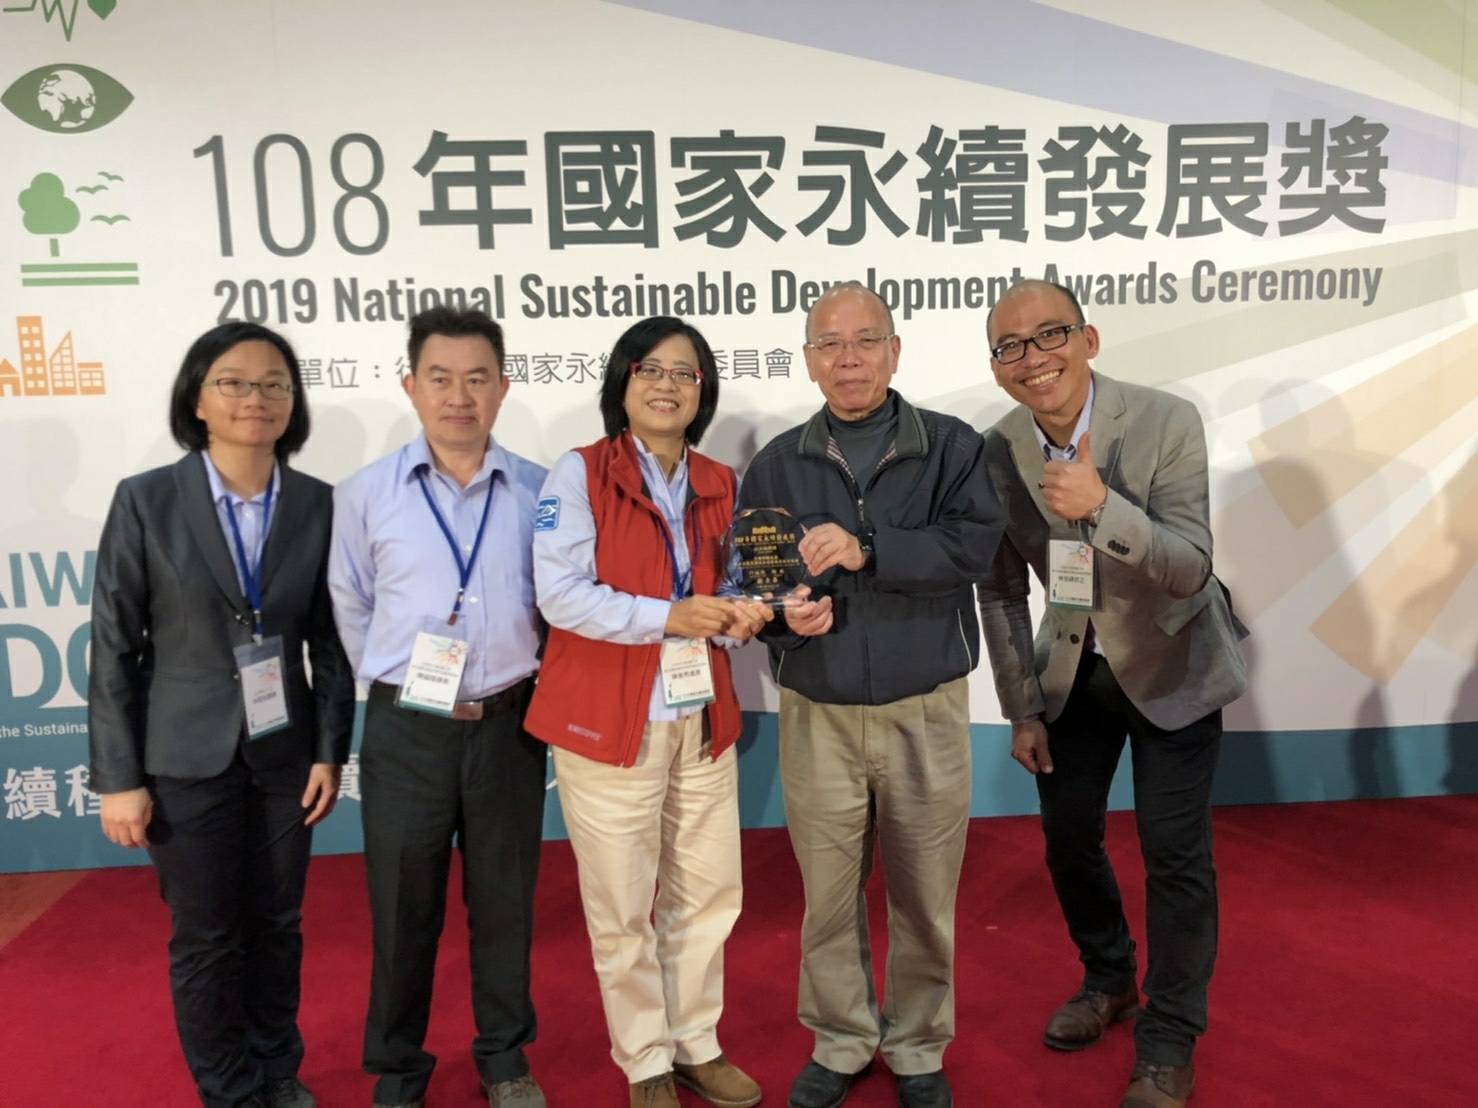 Executive Member of the Executive Yuan Zhang Jingsen (second from right) presented the award to Chen Meixiu (middle), director of the Northeast and Yilan Management Office